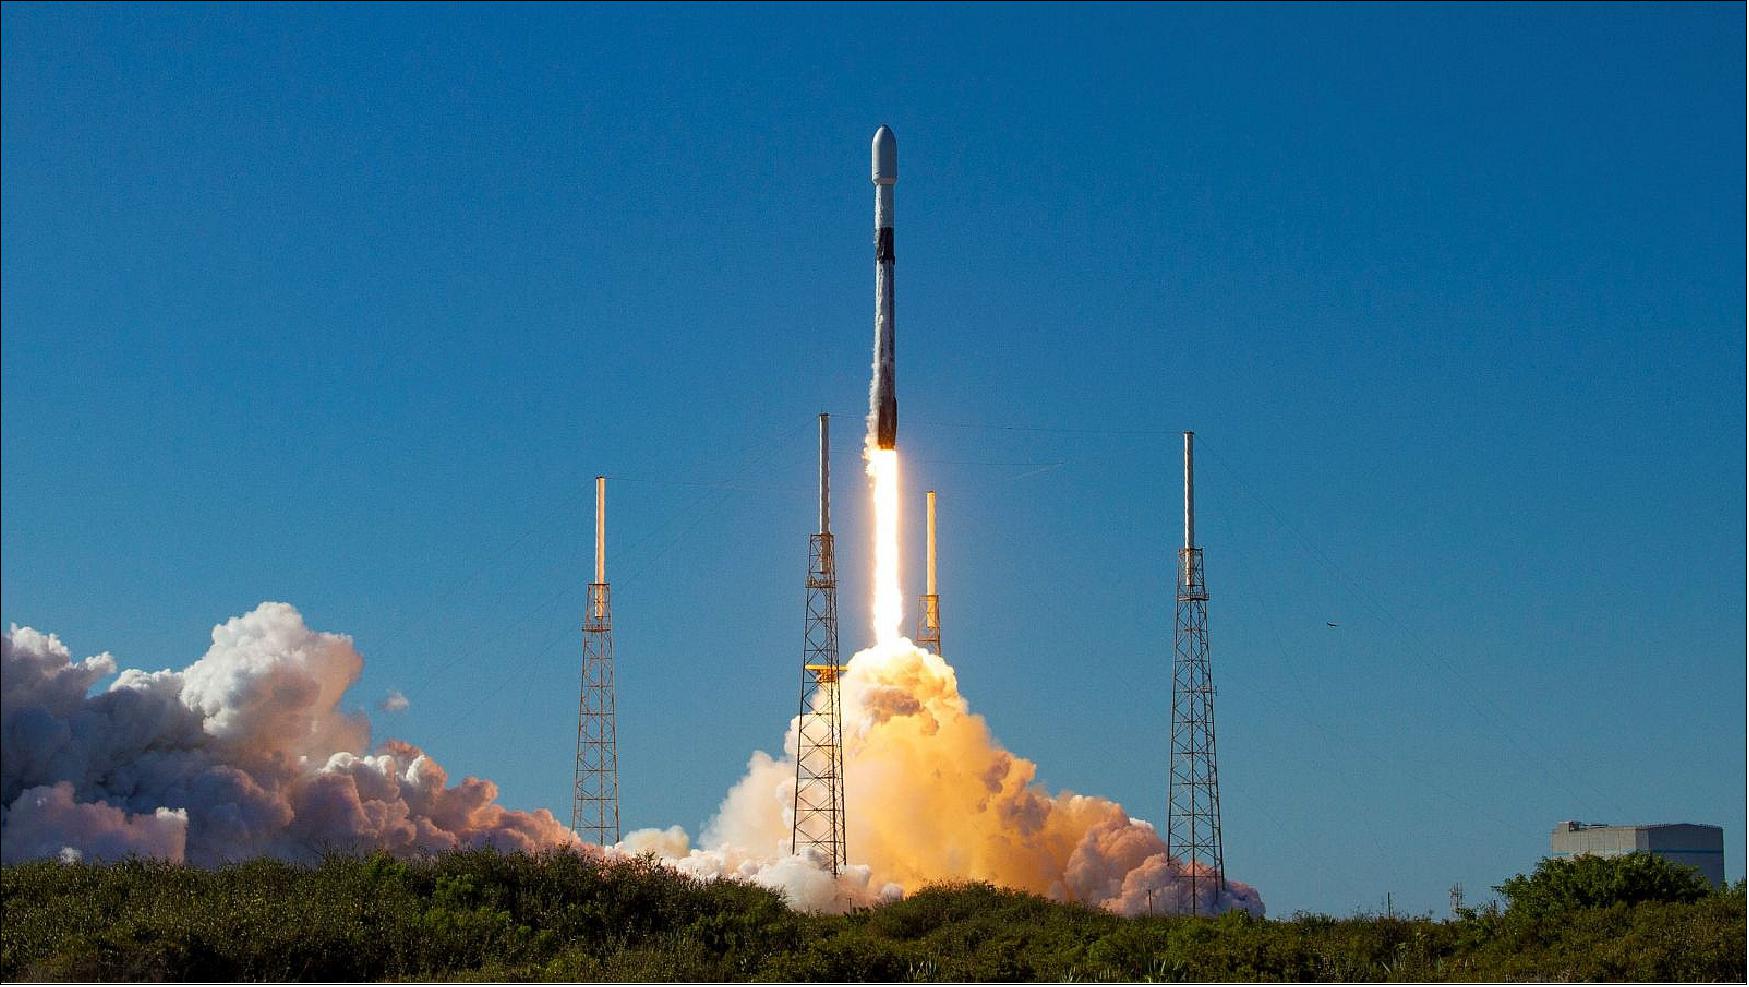 Figure 1: A Falcon 9 launches the Transporter-3 rideshare mission from Cape Canaveral, Florida (image credit: SpaceX)